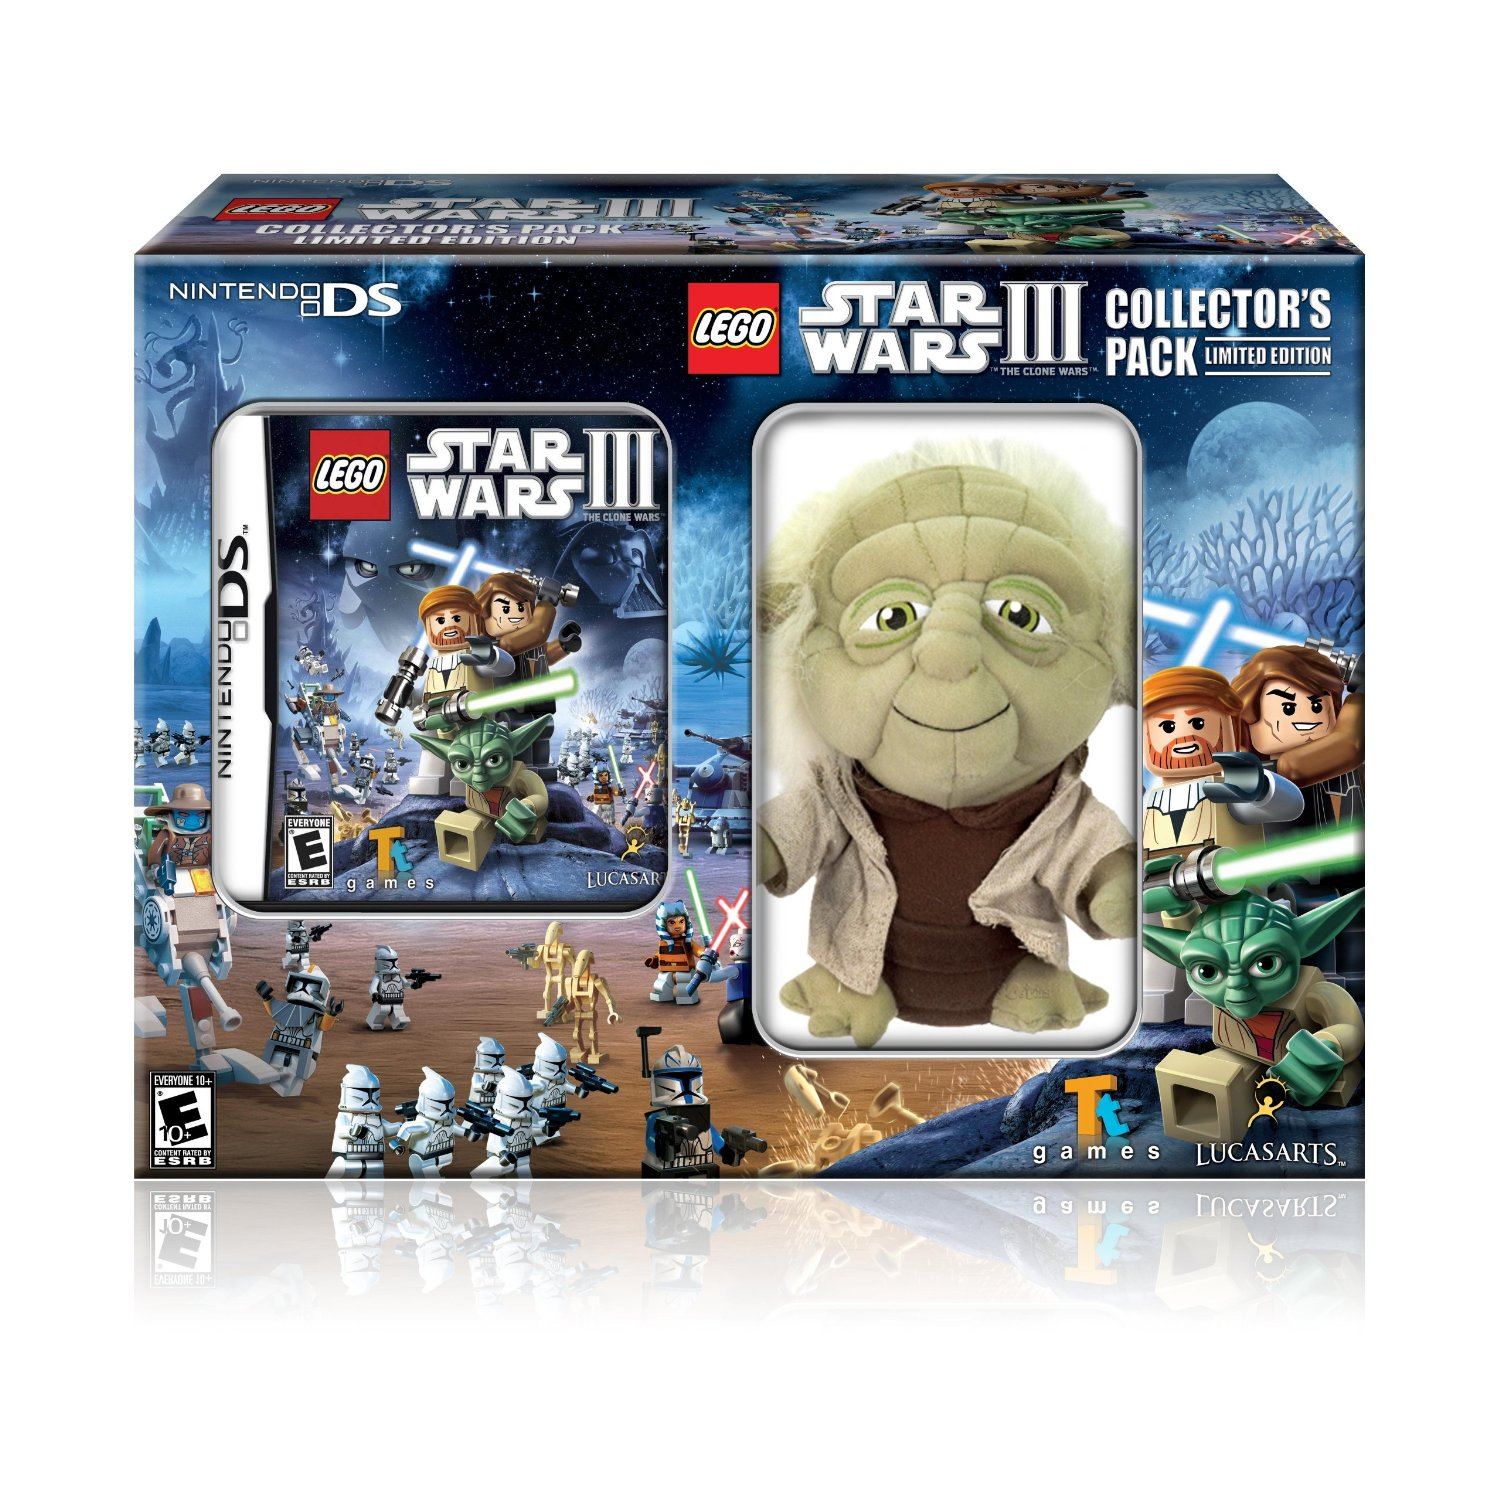 LEGO Star Wars III: The Clone Wars (Collector's Pack Edition) for Nintendo DS